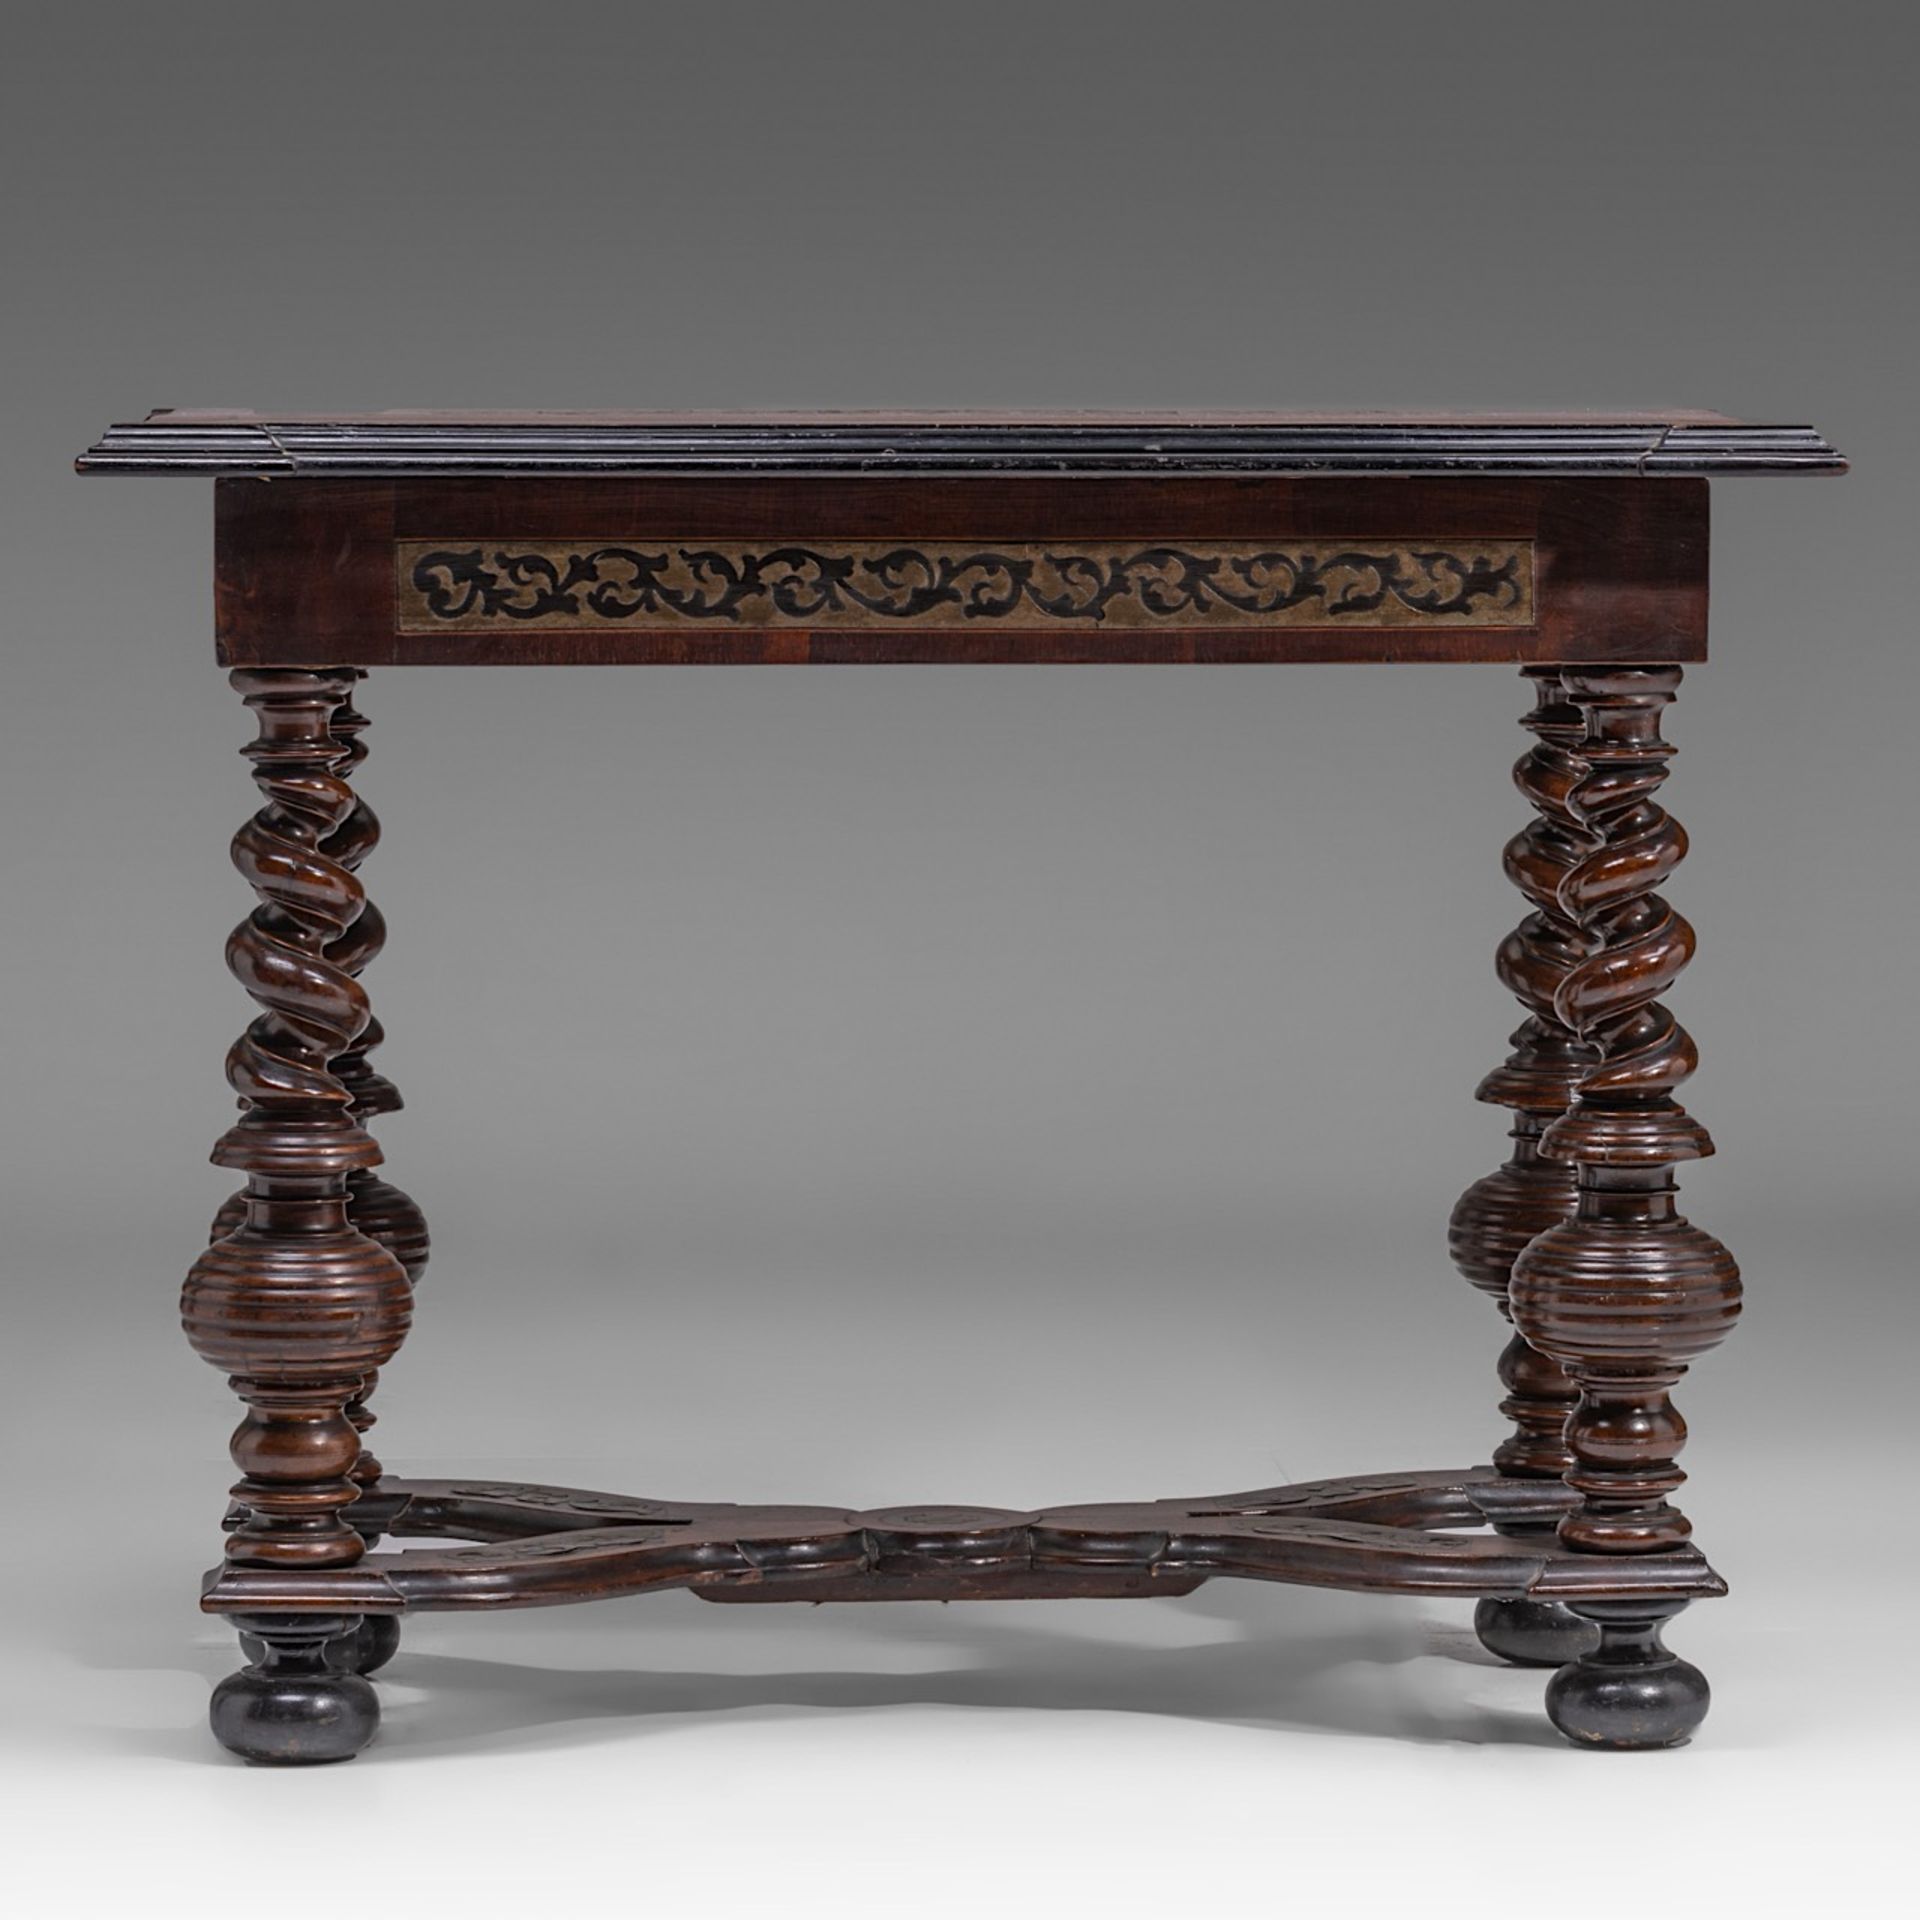 A fine Baroque rosewood and mahogany veneered centre table, 17thC, H 80 - W 105 - D 60 cm - Image 4 of 7